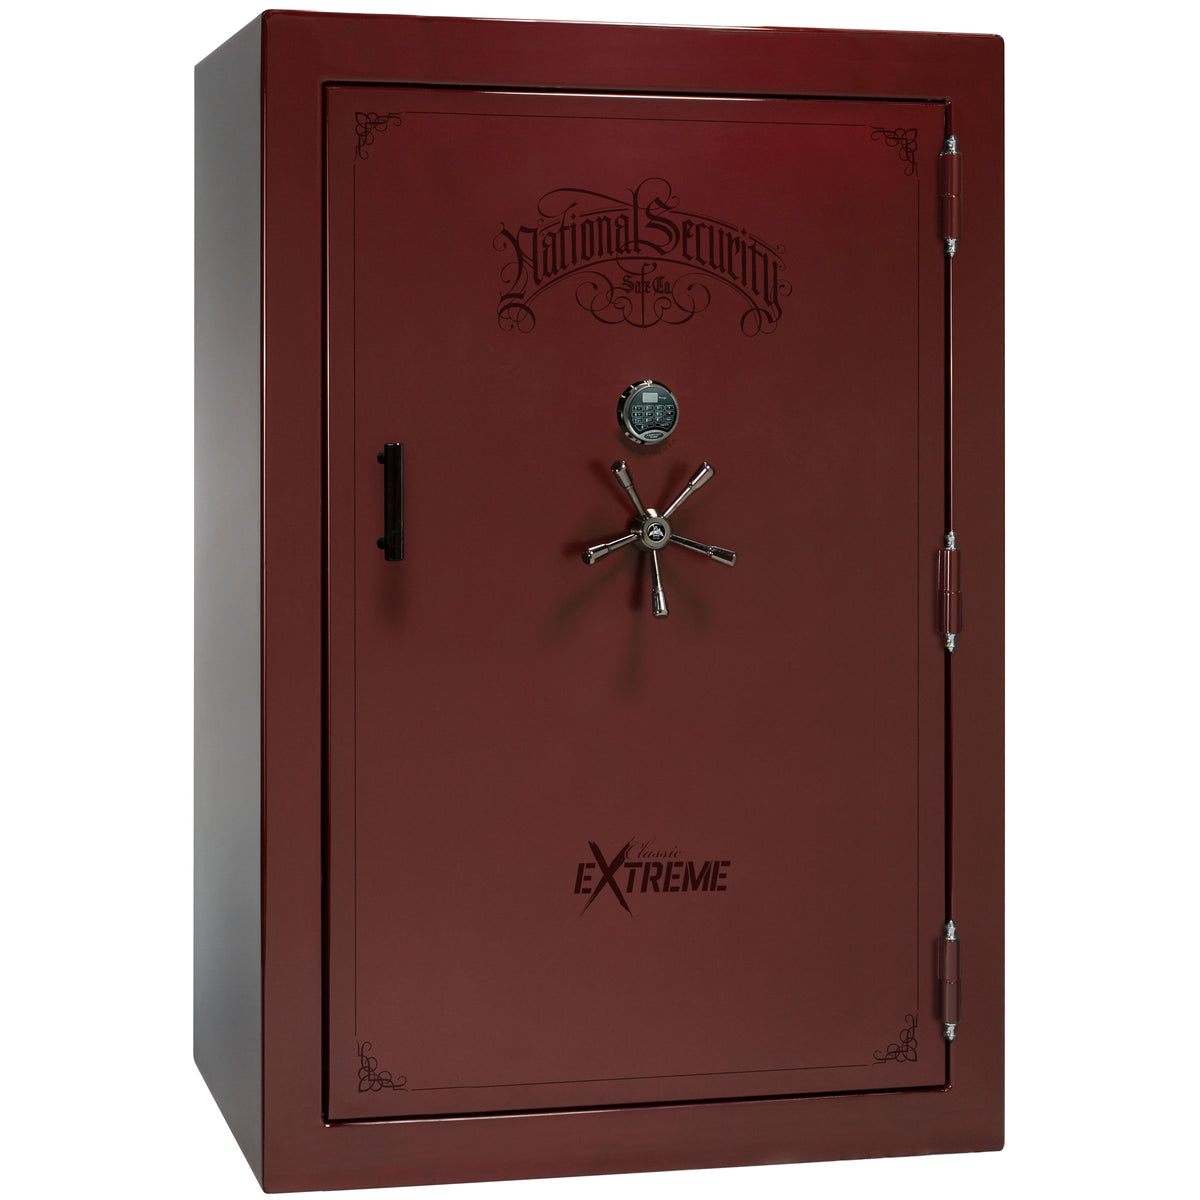 Liberty Classic Select Extreme Wide Body Safe in Burgundy Marble with Black Chrome Electronic Lock.